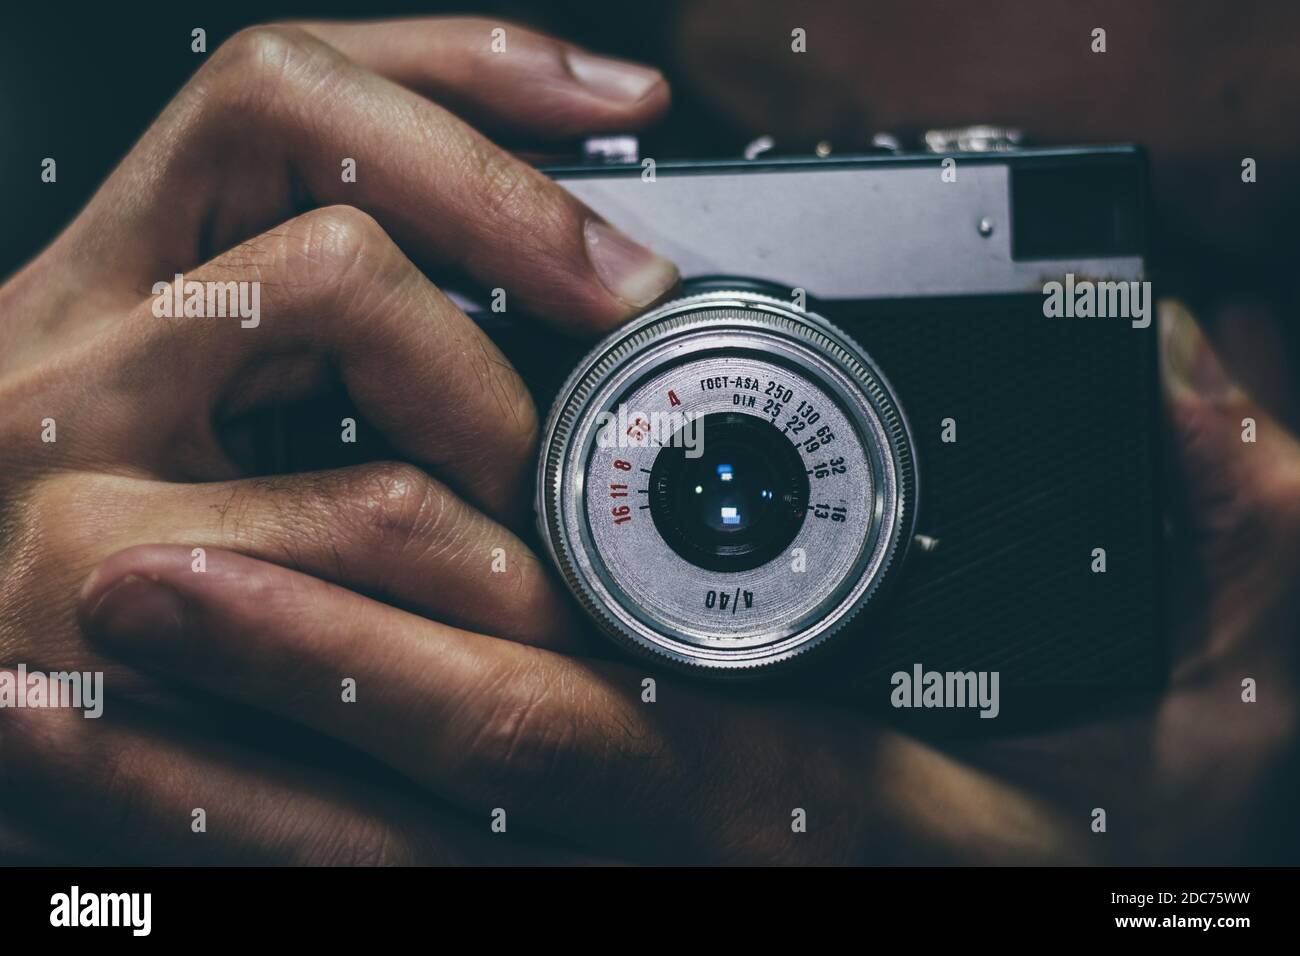 Man taking a photo with an old vintage film camera, close up. Stock Photo